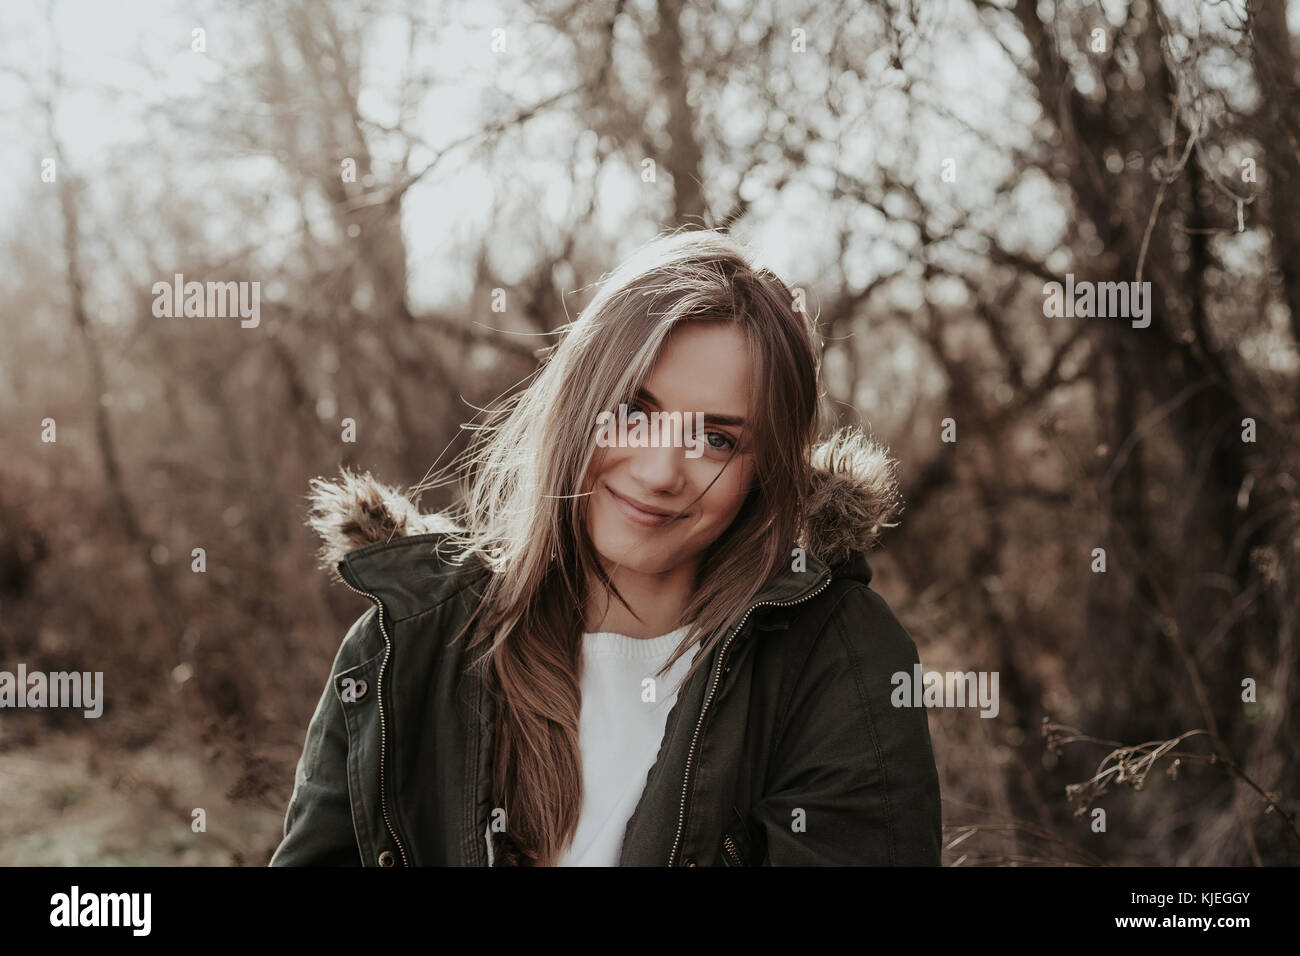 Pretty woman in warm jacket with fur posint at camera outdoor. Young european girl with long blond hair, wide eyebrows looking at camera and smiling. Stock Photo